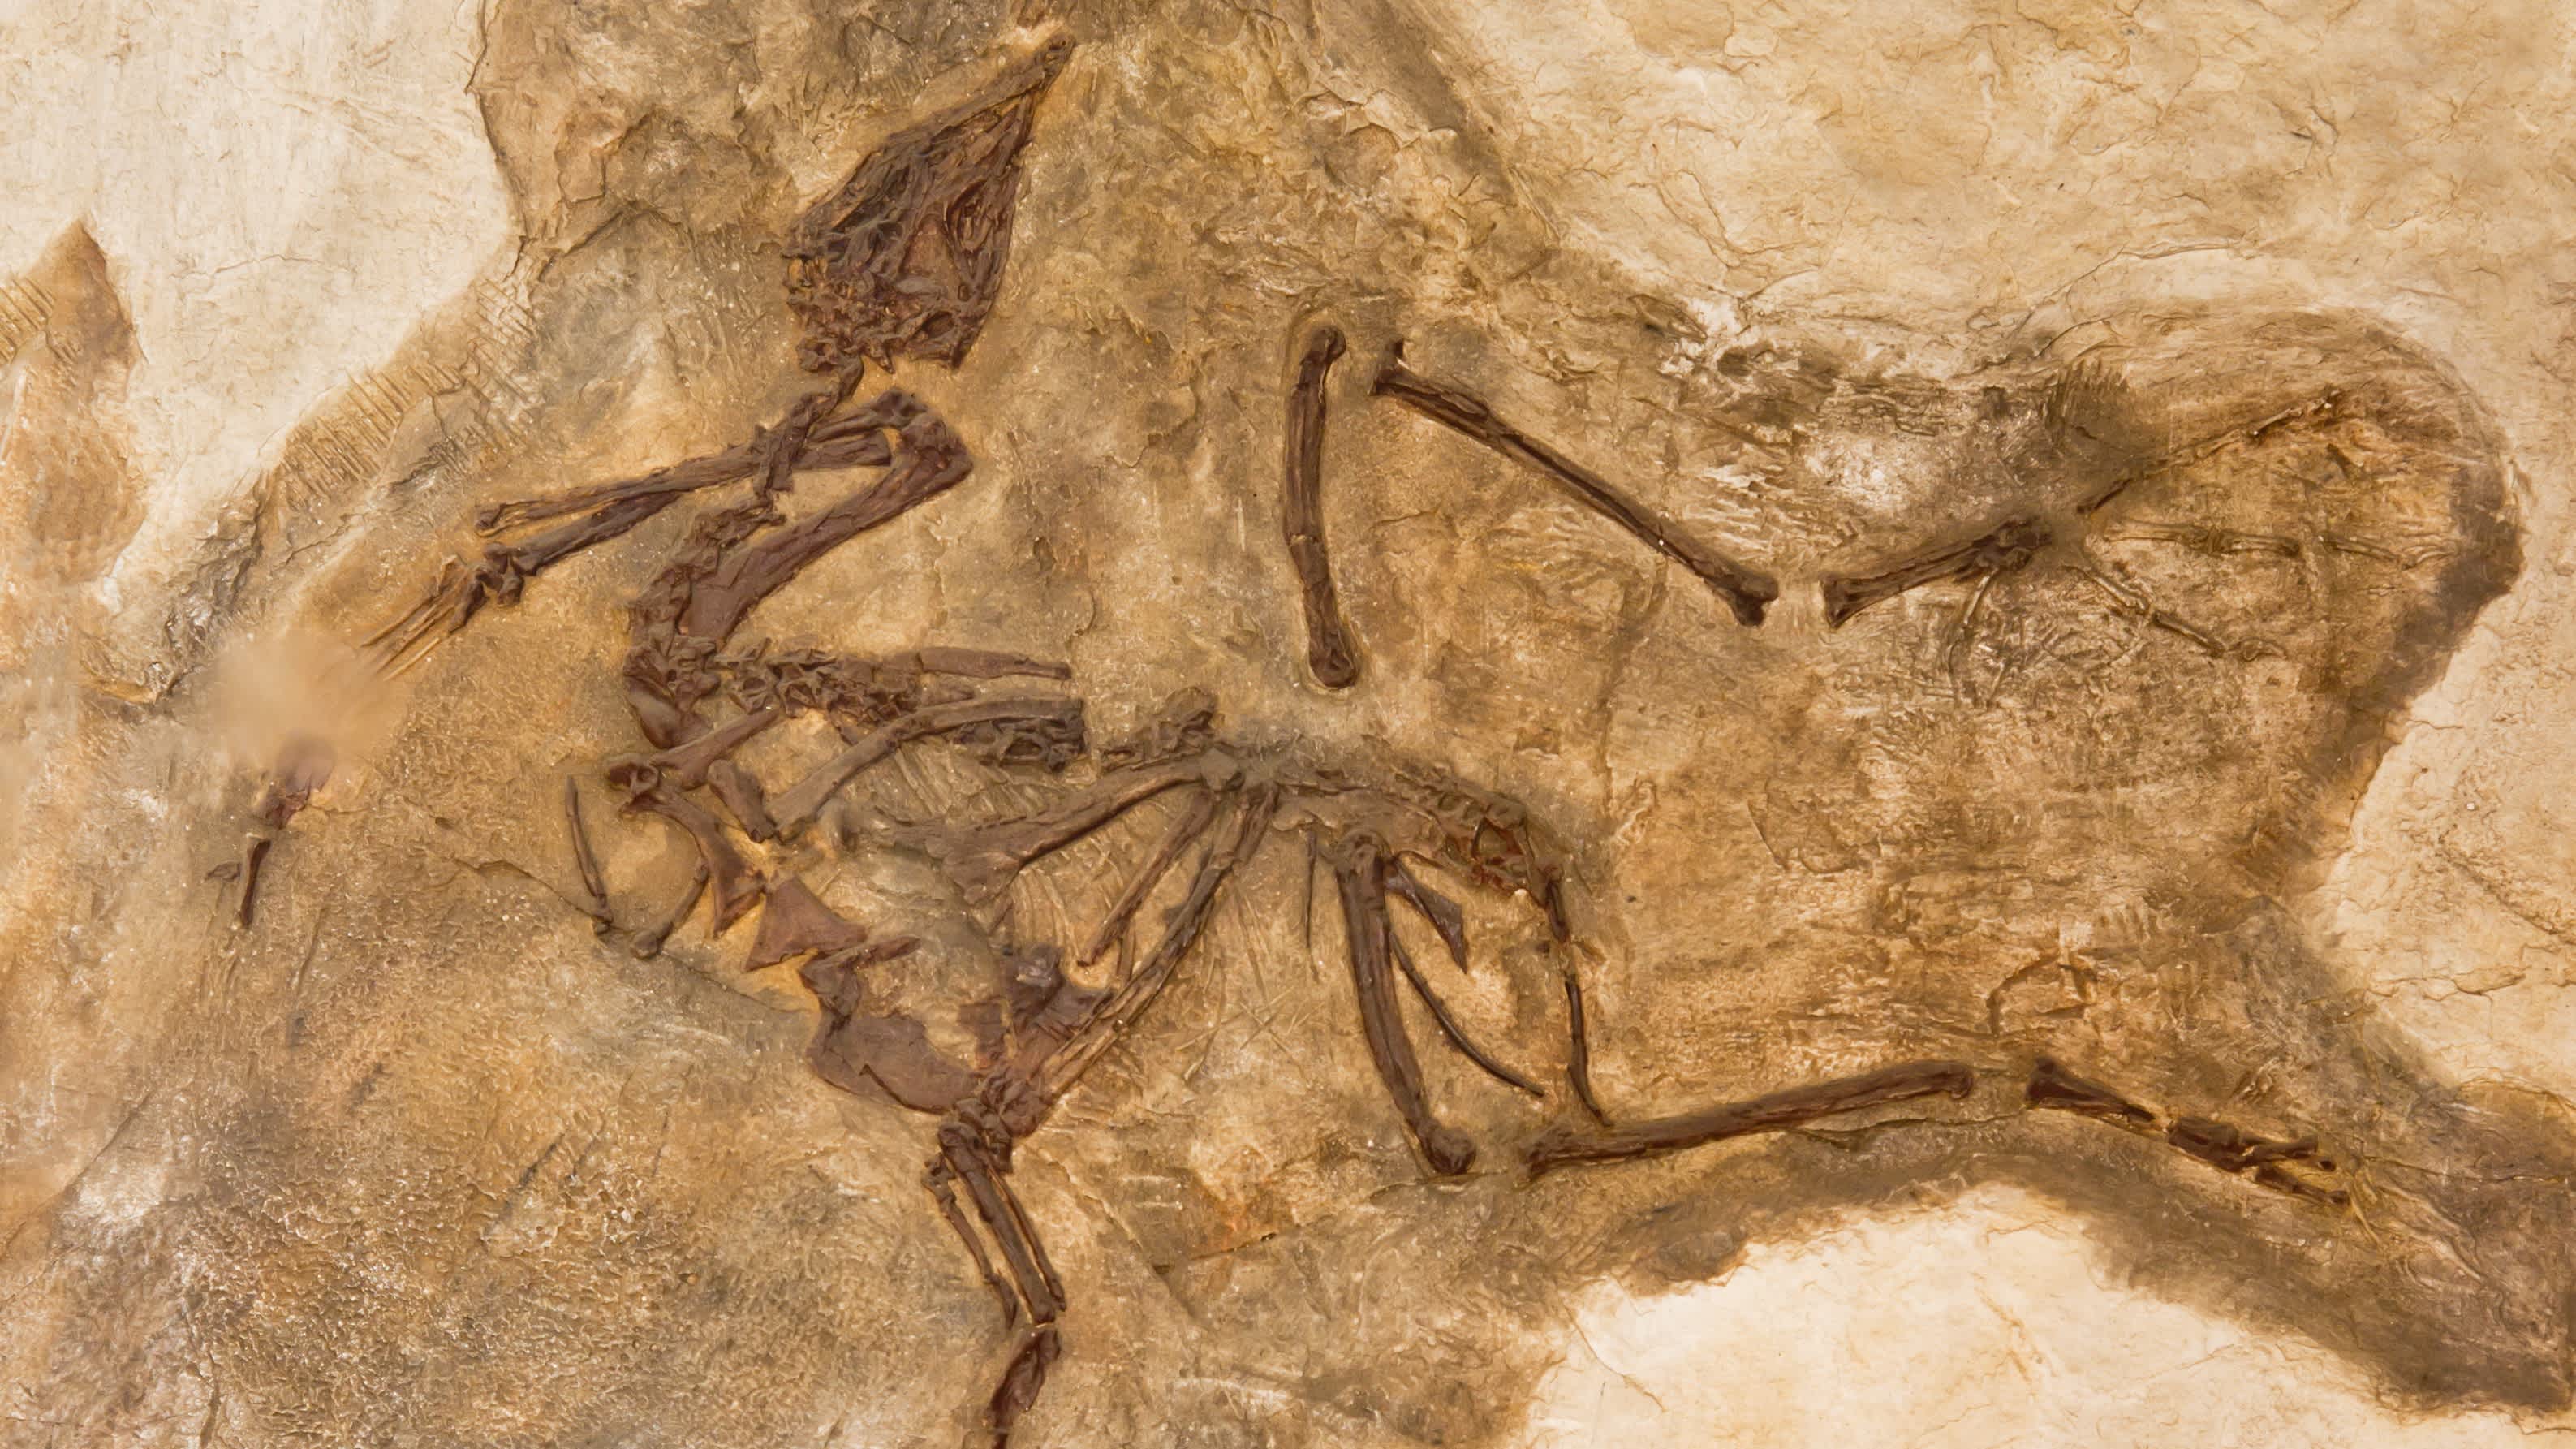 Ein Vogel Fossil im Houston Museum of Natural Science, Texas, USA